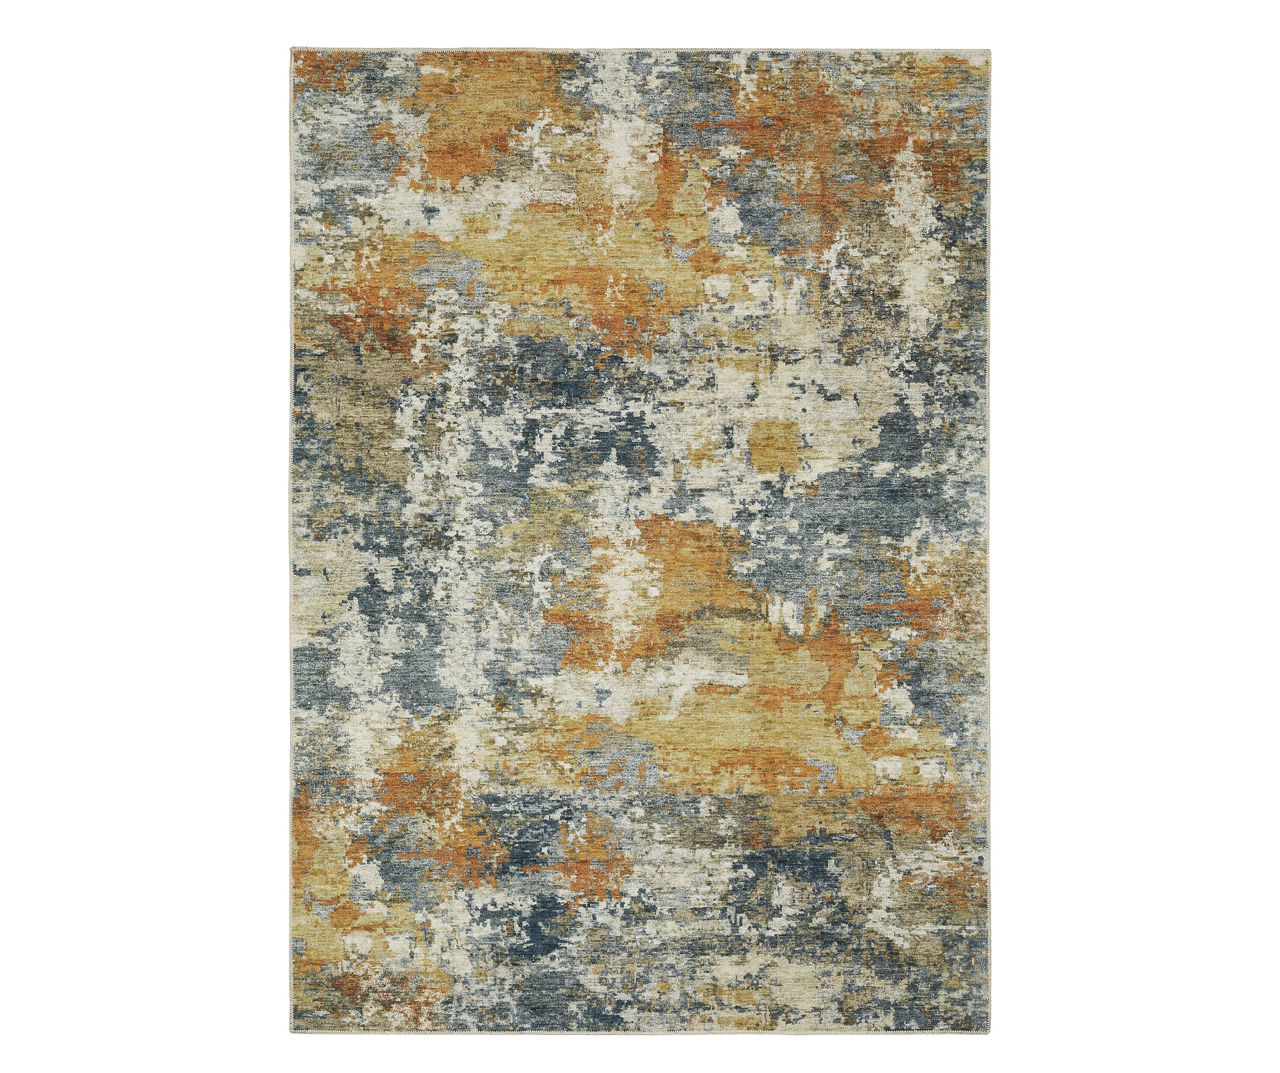 Malay Blue & Gold Abstract Area Rug, (3.6' x 5.6')